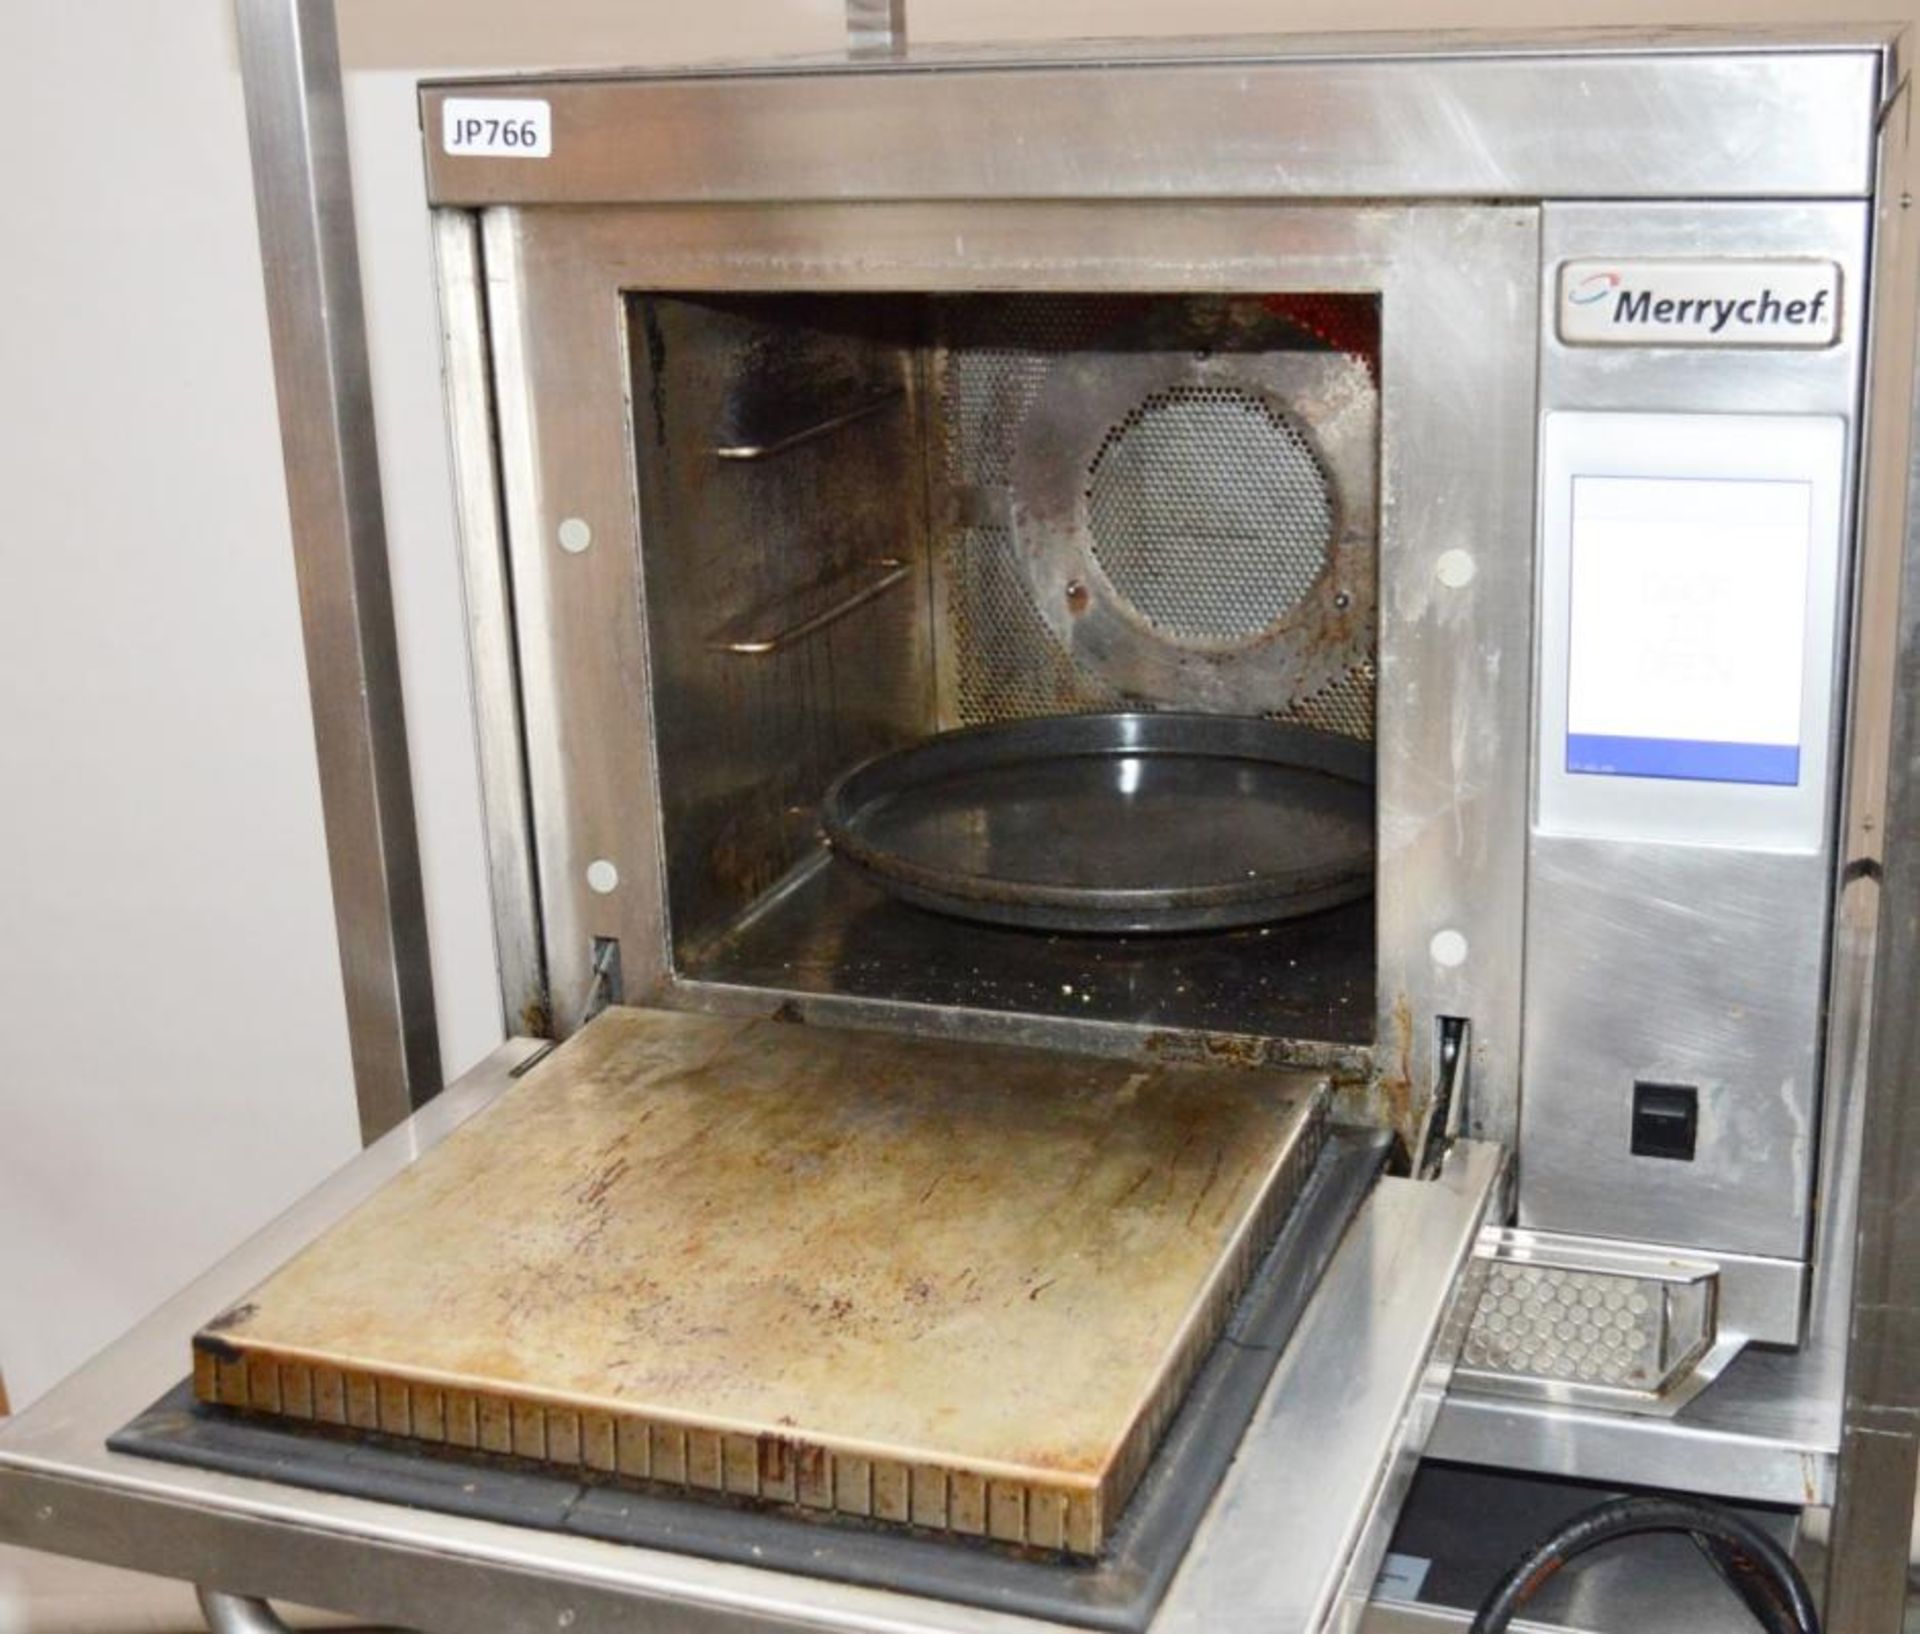 1 x Merrychef Eikon 3 Combination Microwave Oven Features 700w Microwave Output, 3.0kw Convection Ov - Image 10 of 11